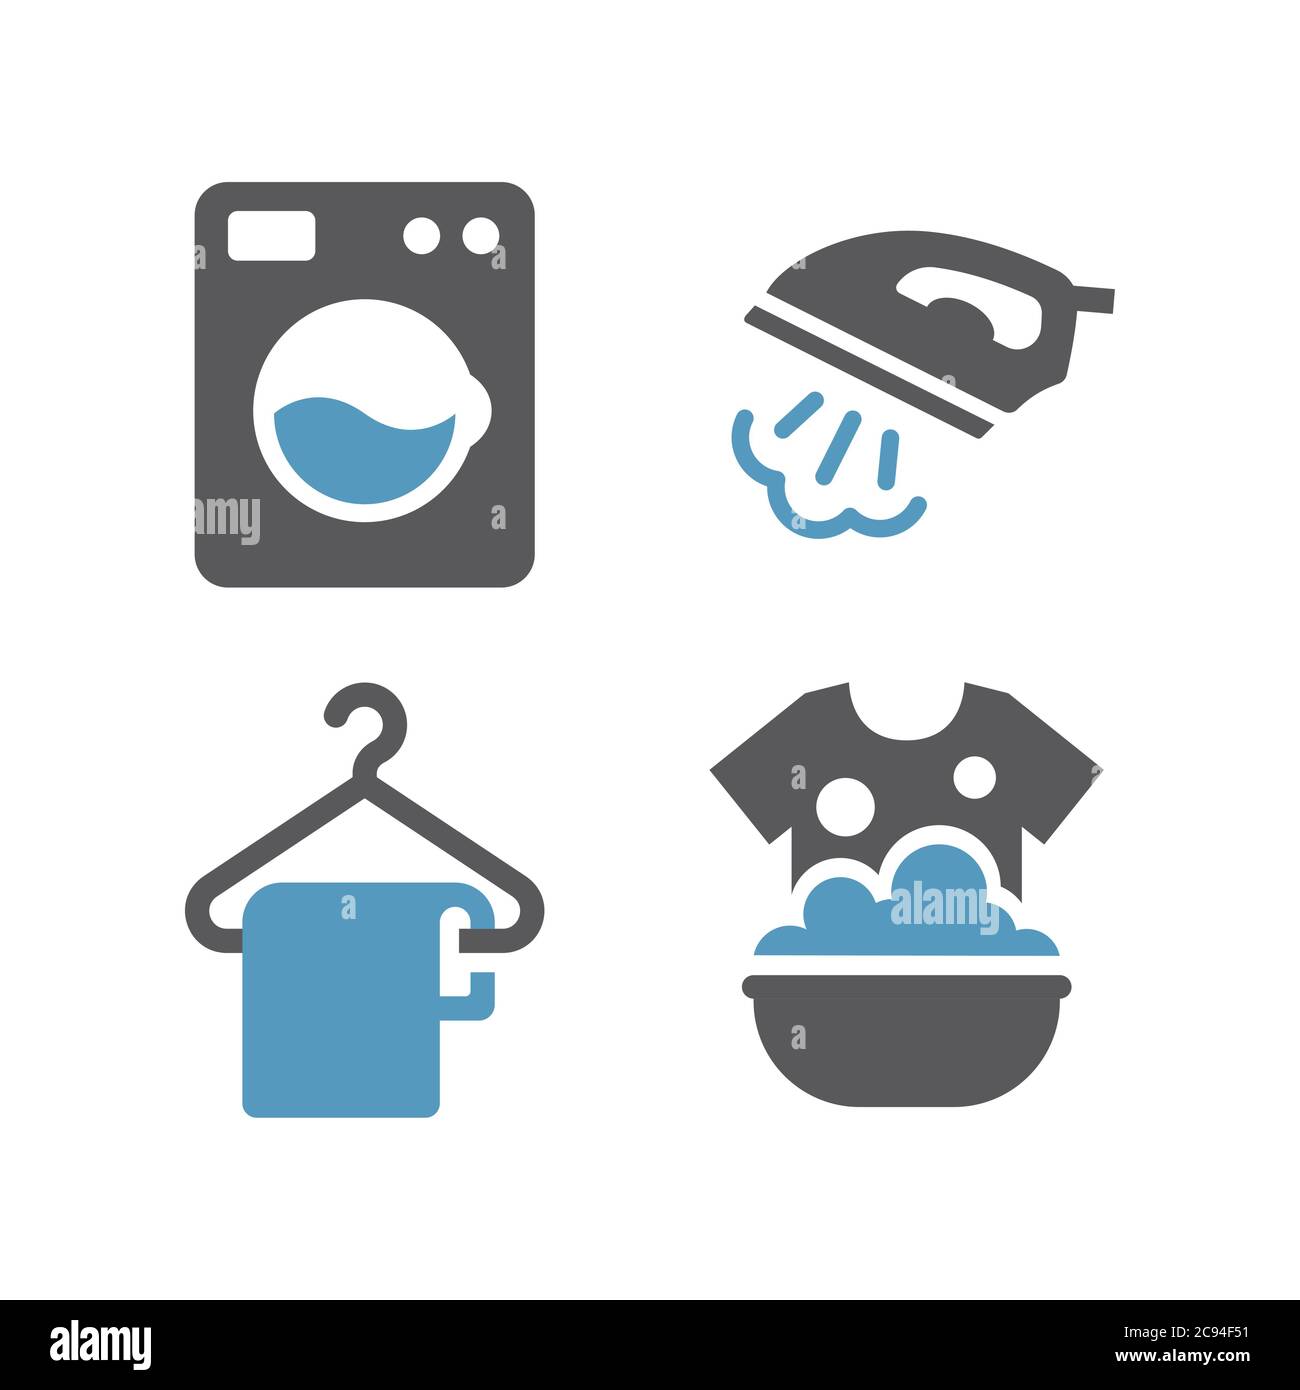 Laundry service black glyph icon set. Iron with steam, dry cleaning, washing machine symbols. Stock Vector